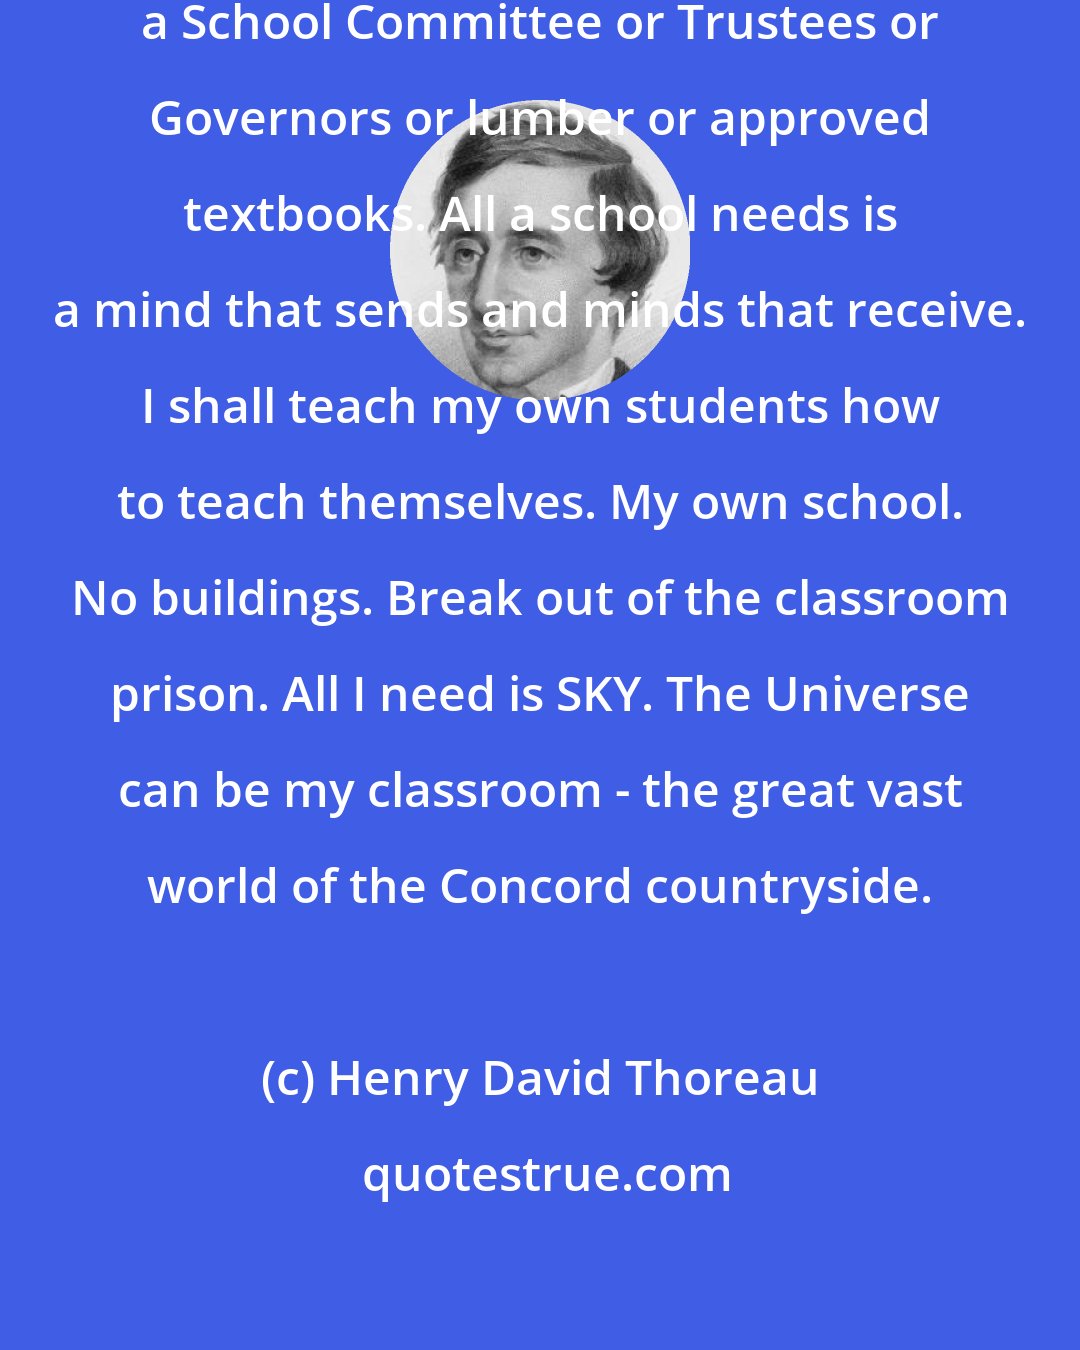 Henry David Thoreau: I realized a school doesn't need a School Committee or Trustees or Governors or lumber or approved textbooks. All a school needs is a mind that sends and minds that receive. I shall teach my own students how to teach themselves. My own school. No buildings. Break out of the classroom prison. All I need is SKY. The Universe can be my classroom - the great vast world of the Concord countryside.